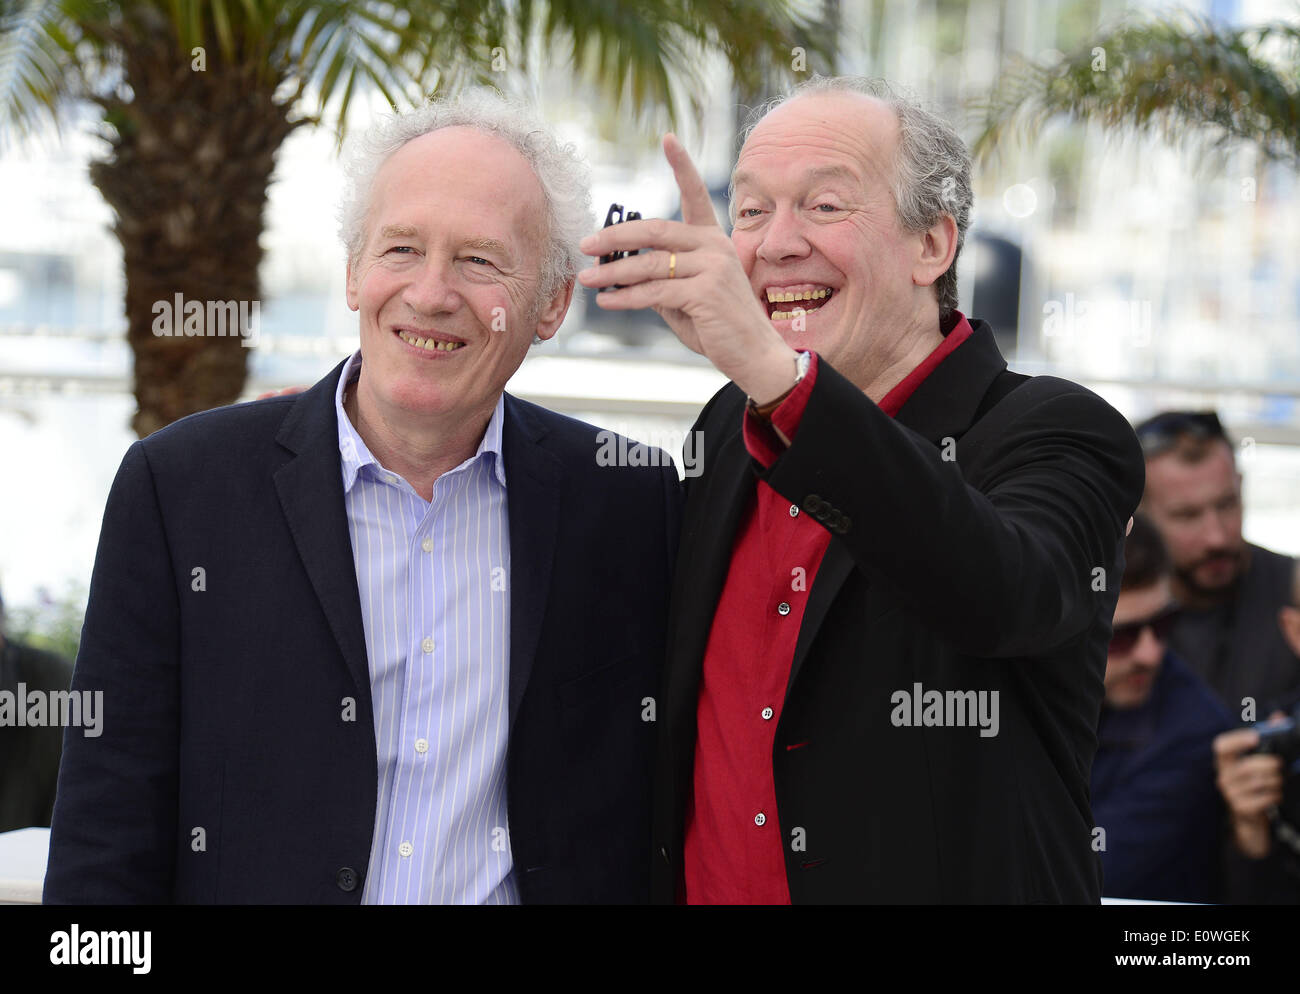 Cannes, France. 20th May, 2014. Belgian director brothers Jean-Pierre Dardenne (L) and Luc Dardenne pose during the photocall of 'Two Days, One Night' at the 67th Cannes Film Festival in Cannes, France, May 20, 2014. The movie is presented in the Official Competition of the festival which runs from 14 to 25 May. Credit:  Ye Pingfan/Xinhua/Alamy Live News Stock Photo